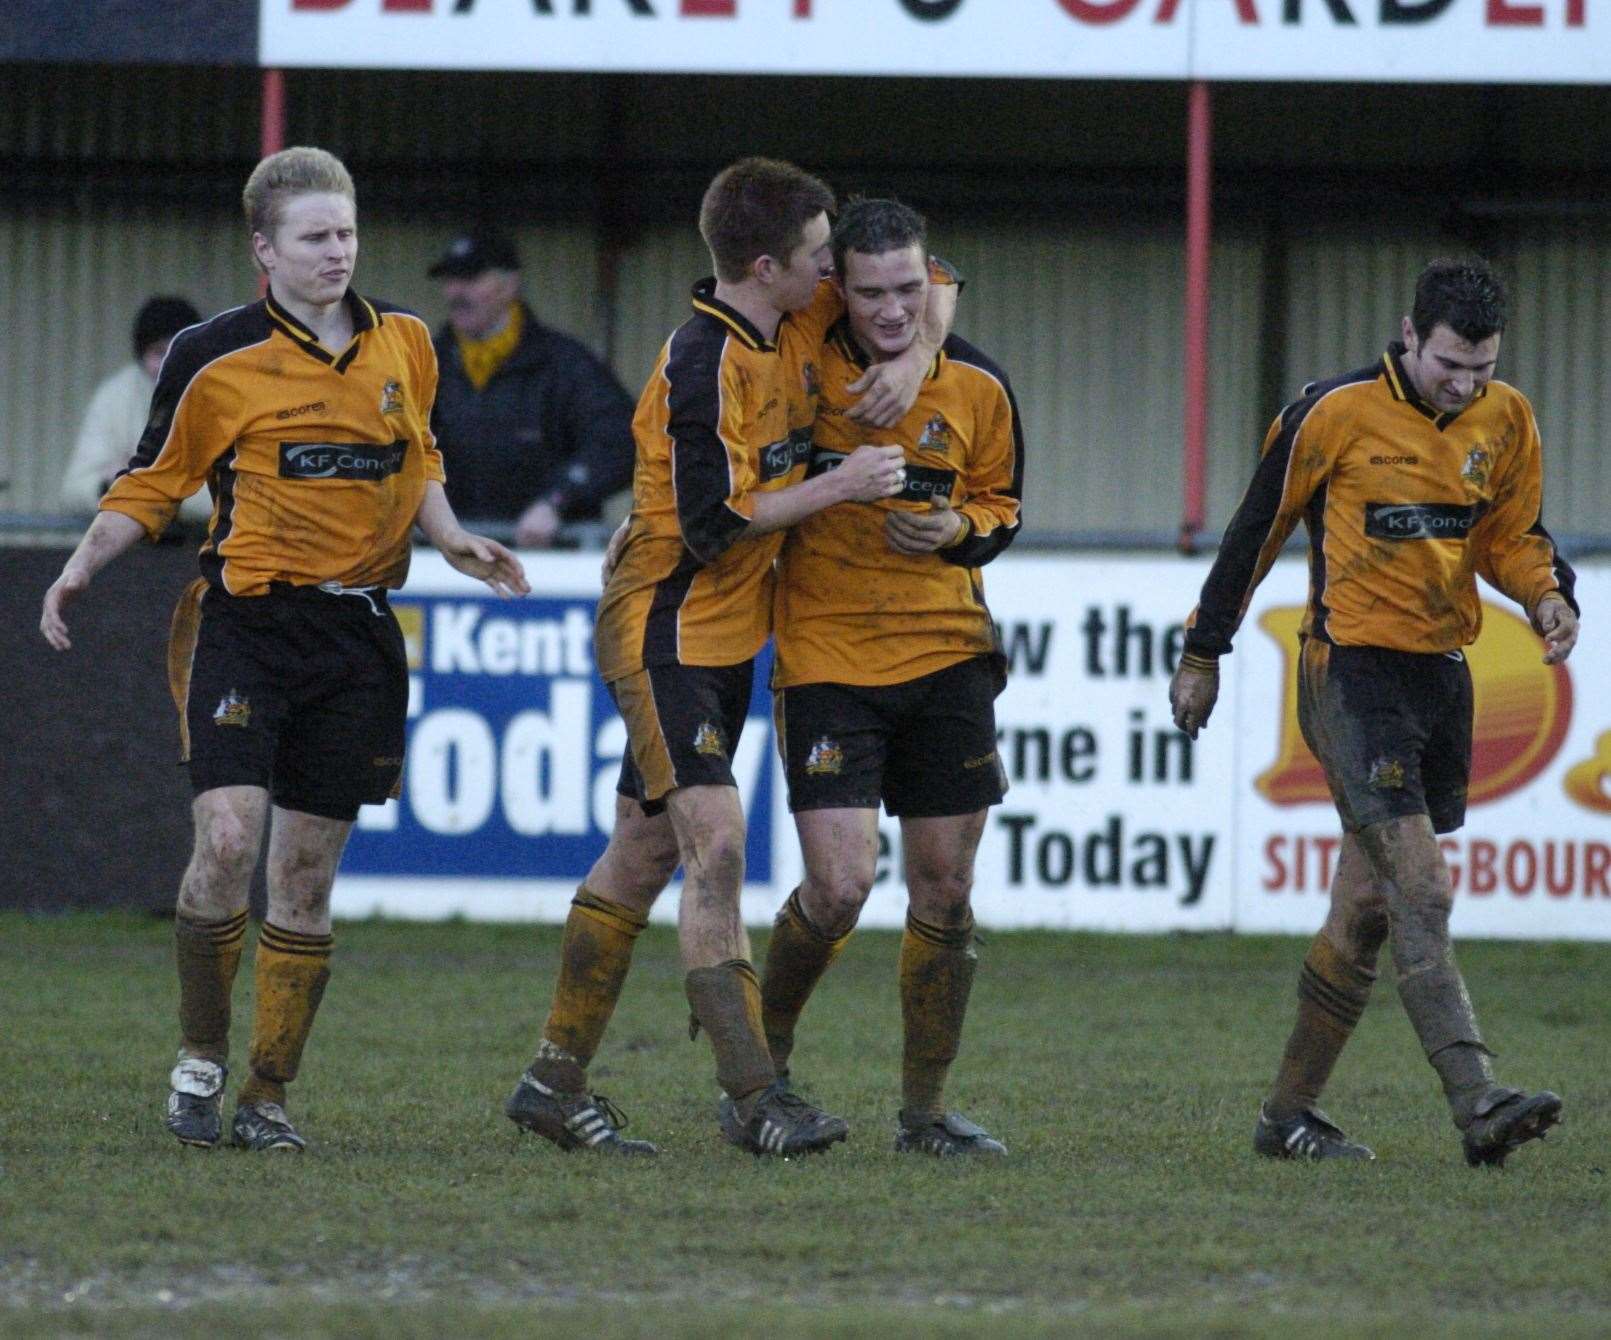 Danny Kedwell is congratulated by Elliot Bradbrook after scoring for Maidstone against Beckenham Picture: Andy Payton